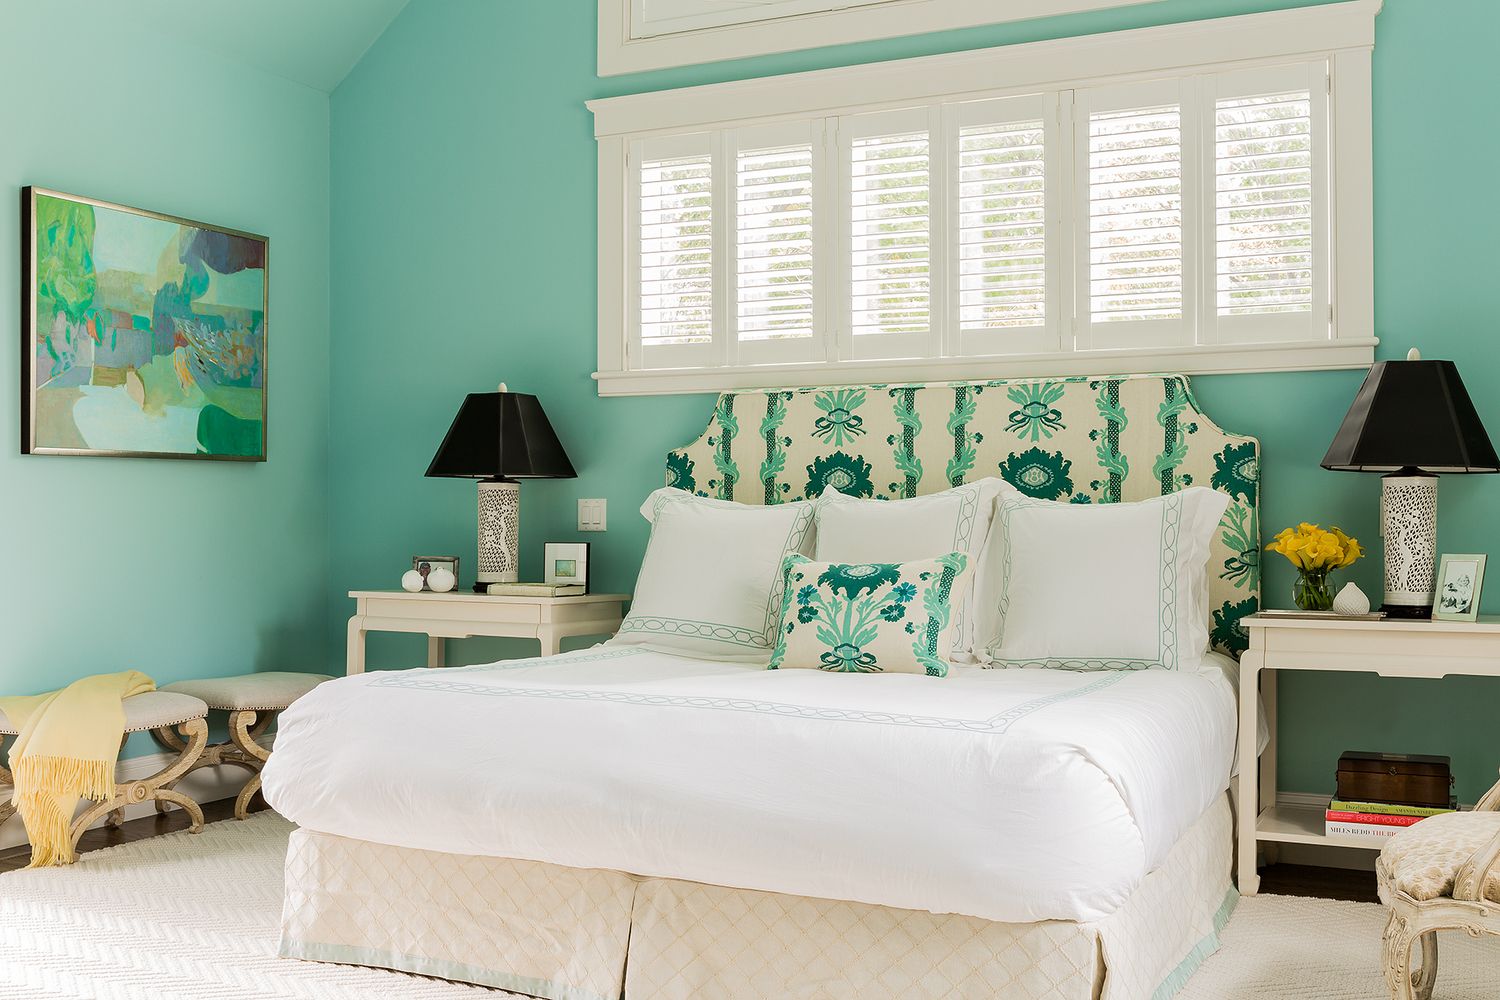 40 Vibrant Room Color Ideas - How to Decorate With Bright